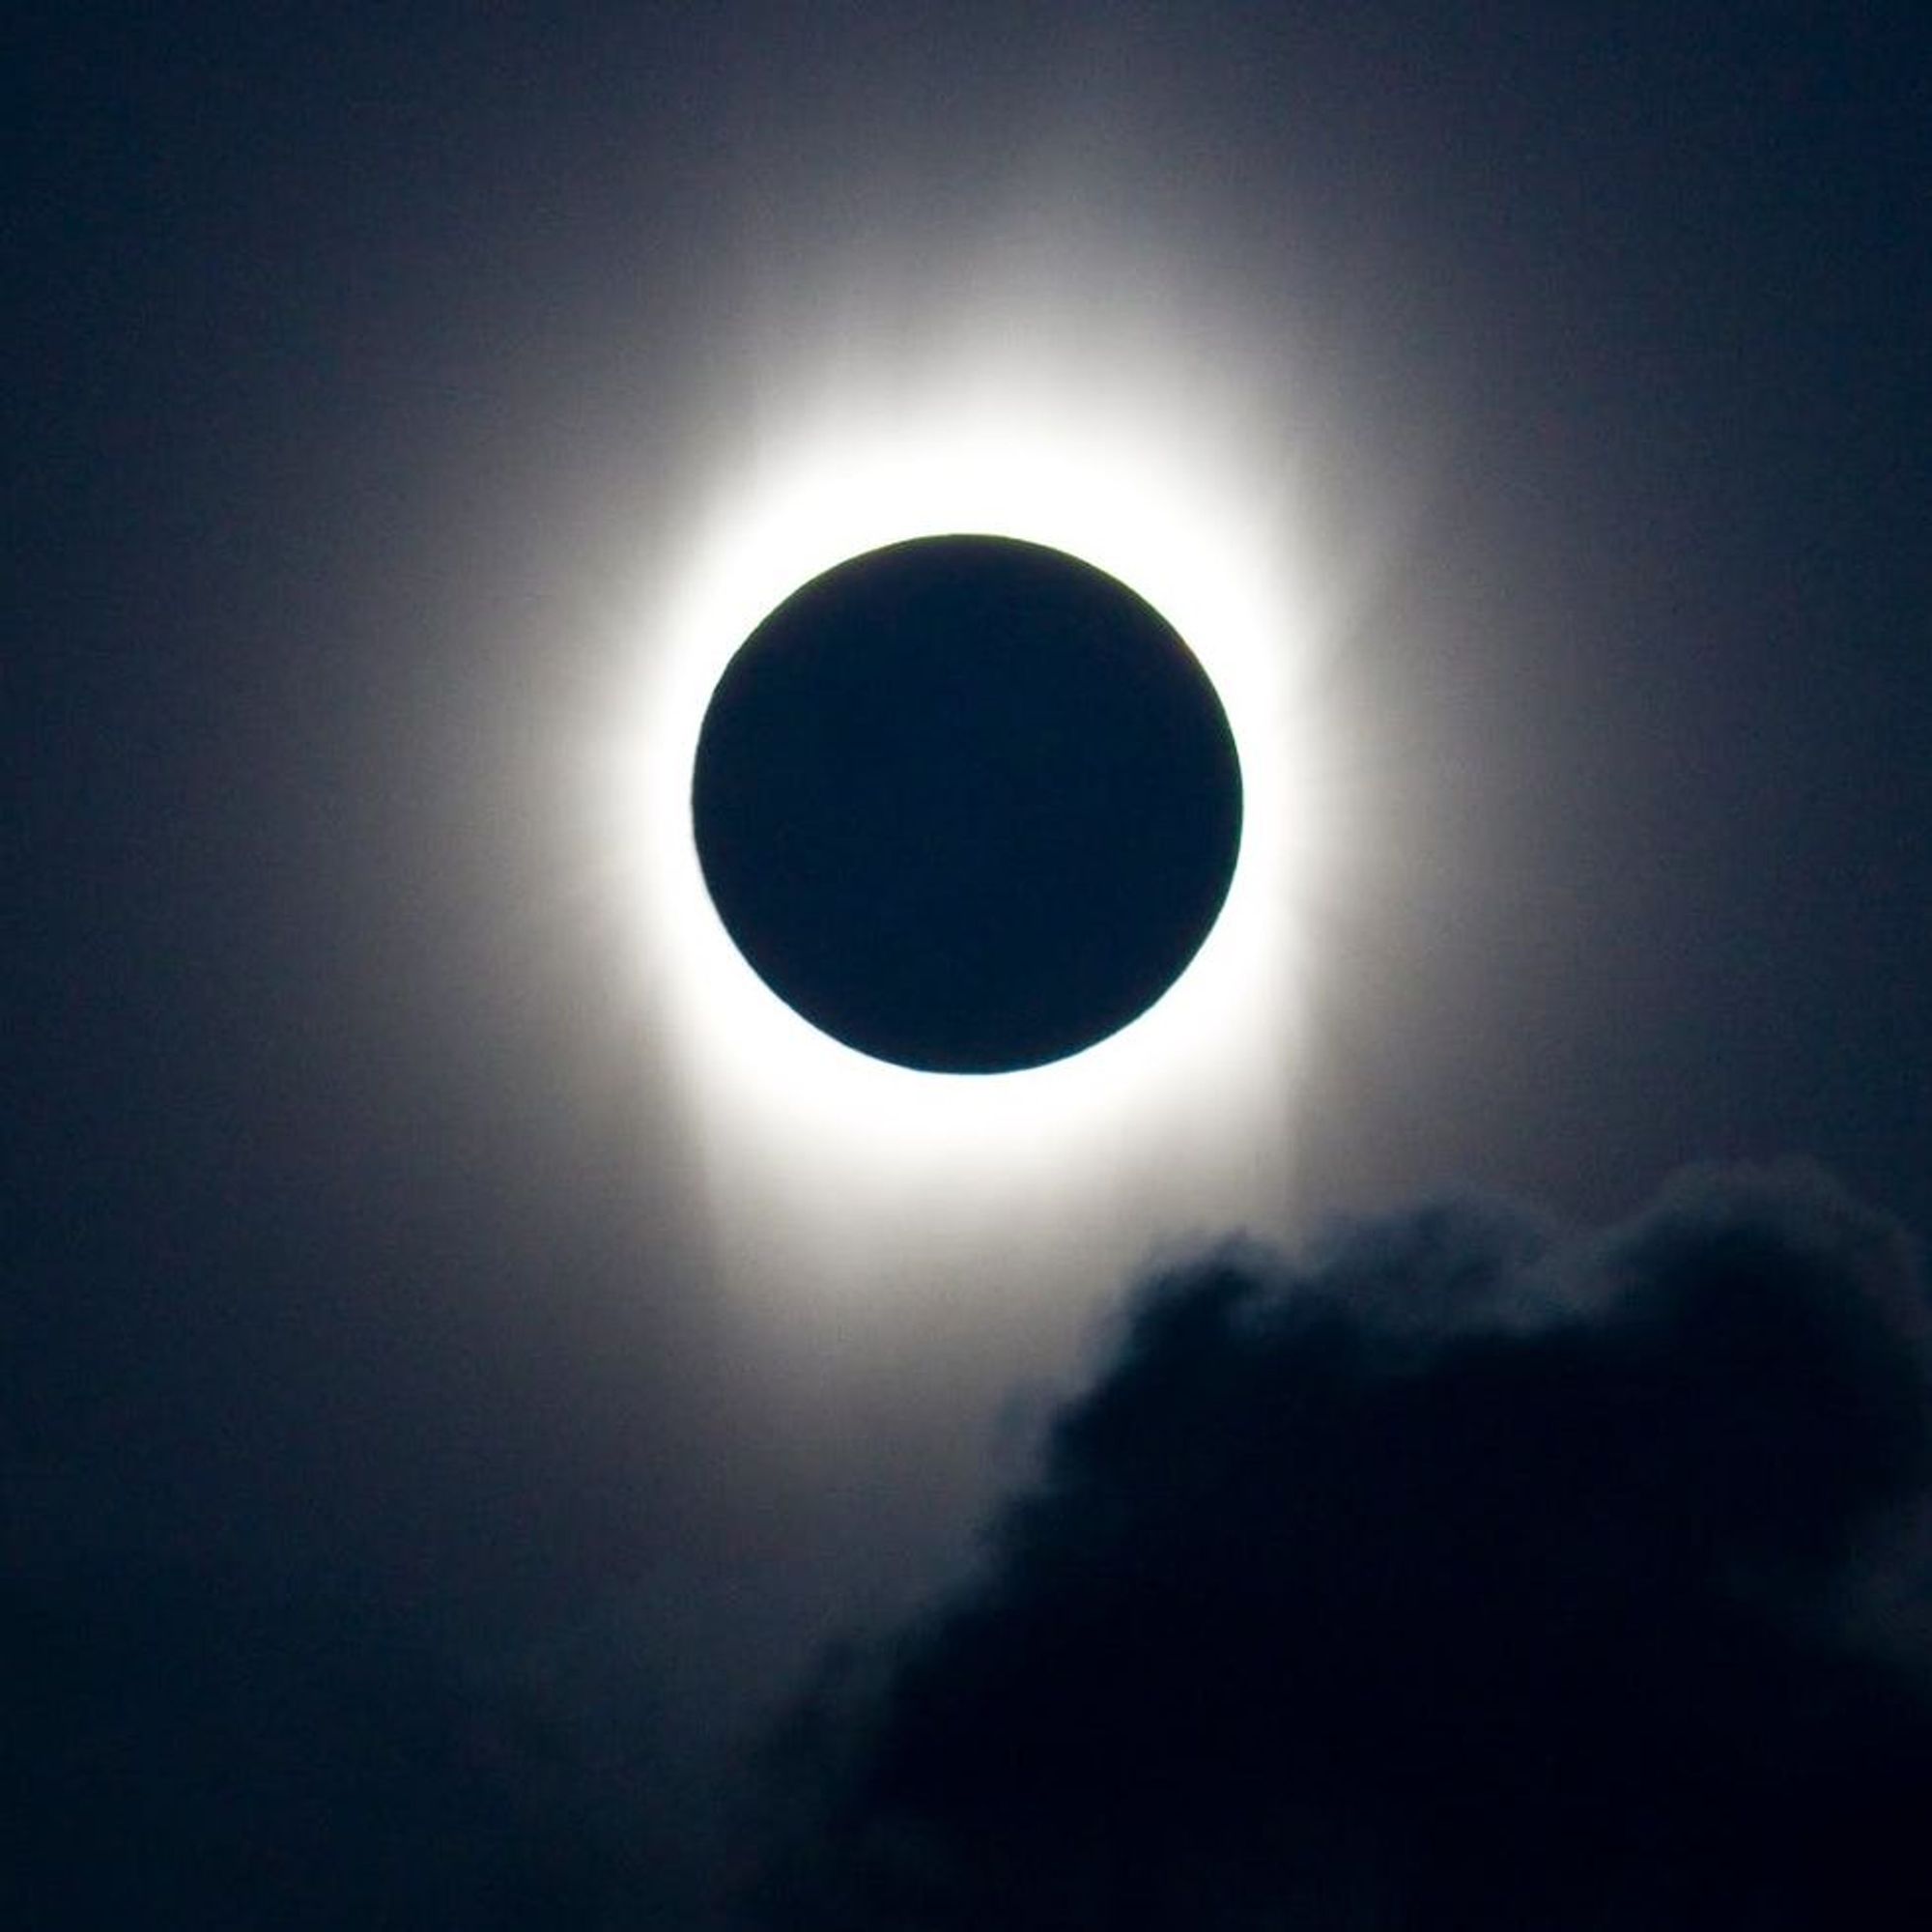 A Rare Total Solar Eclipse Will Be Visible from the US in 2017 and We ...